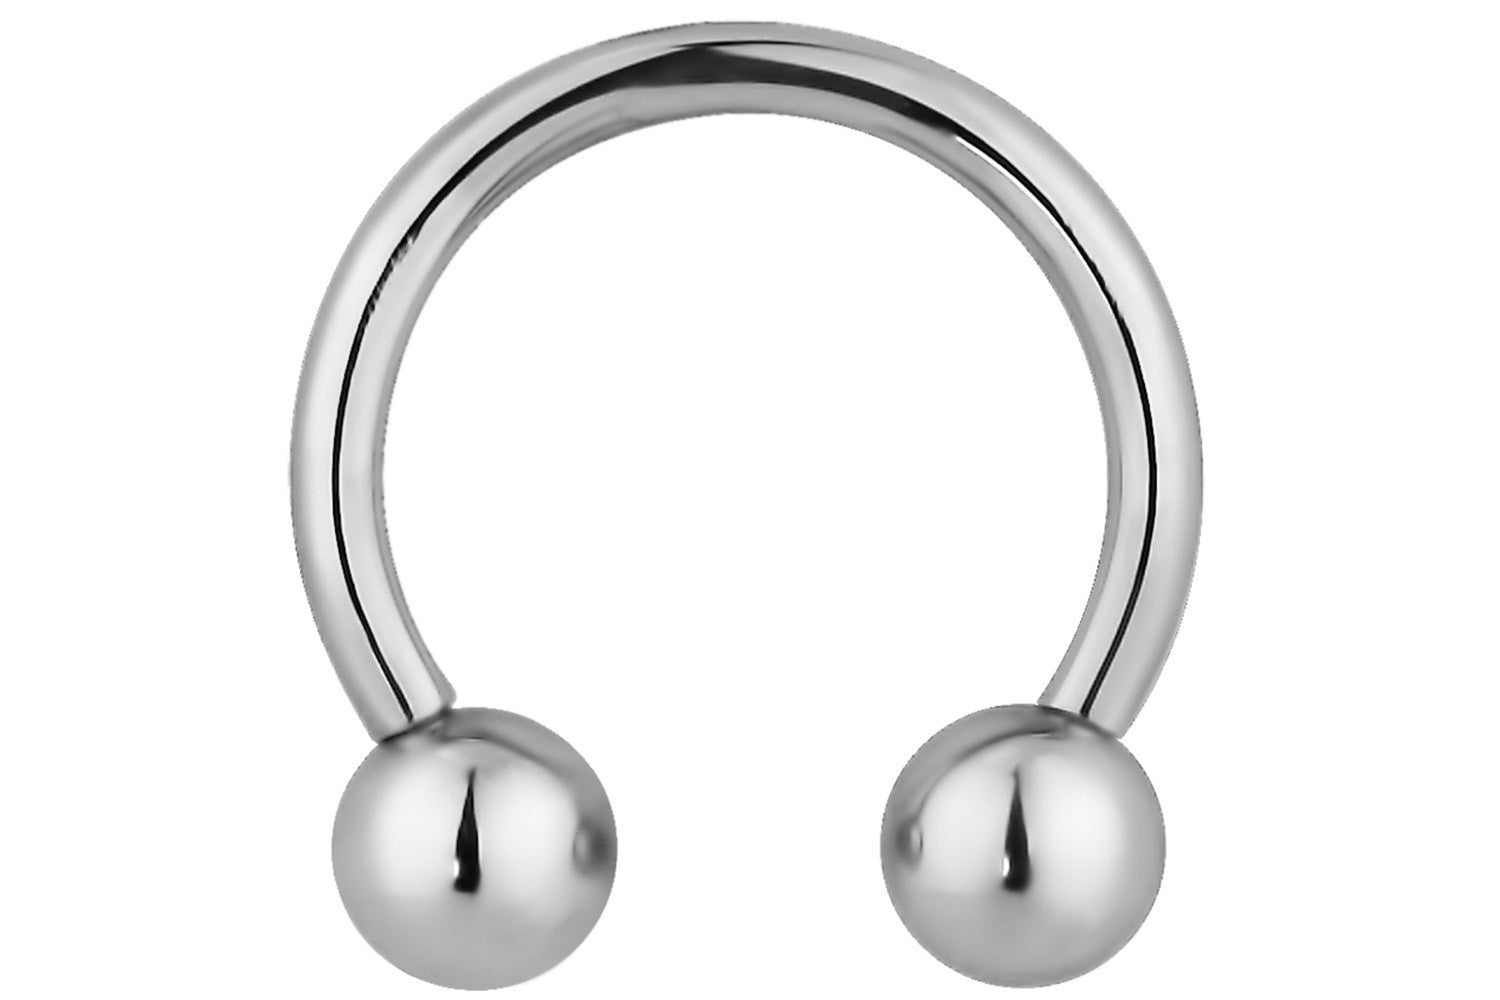 This 16 gauge 10 mm horseshoe ring is internally threaded for maximum comfort and ease of use. It is made with surgical grade 316L Stainless Steel.